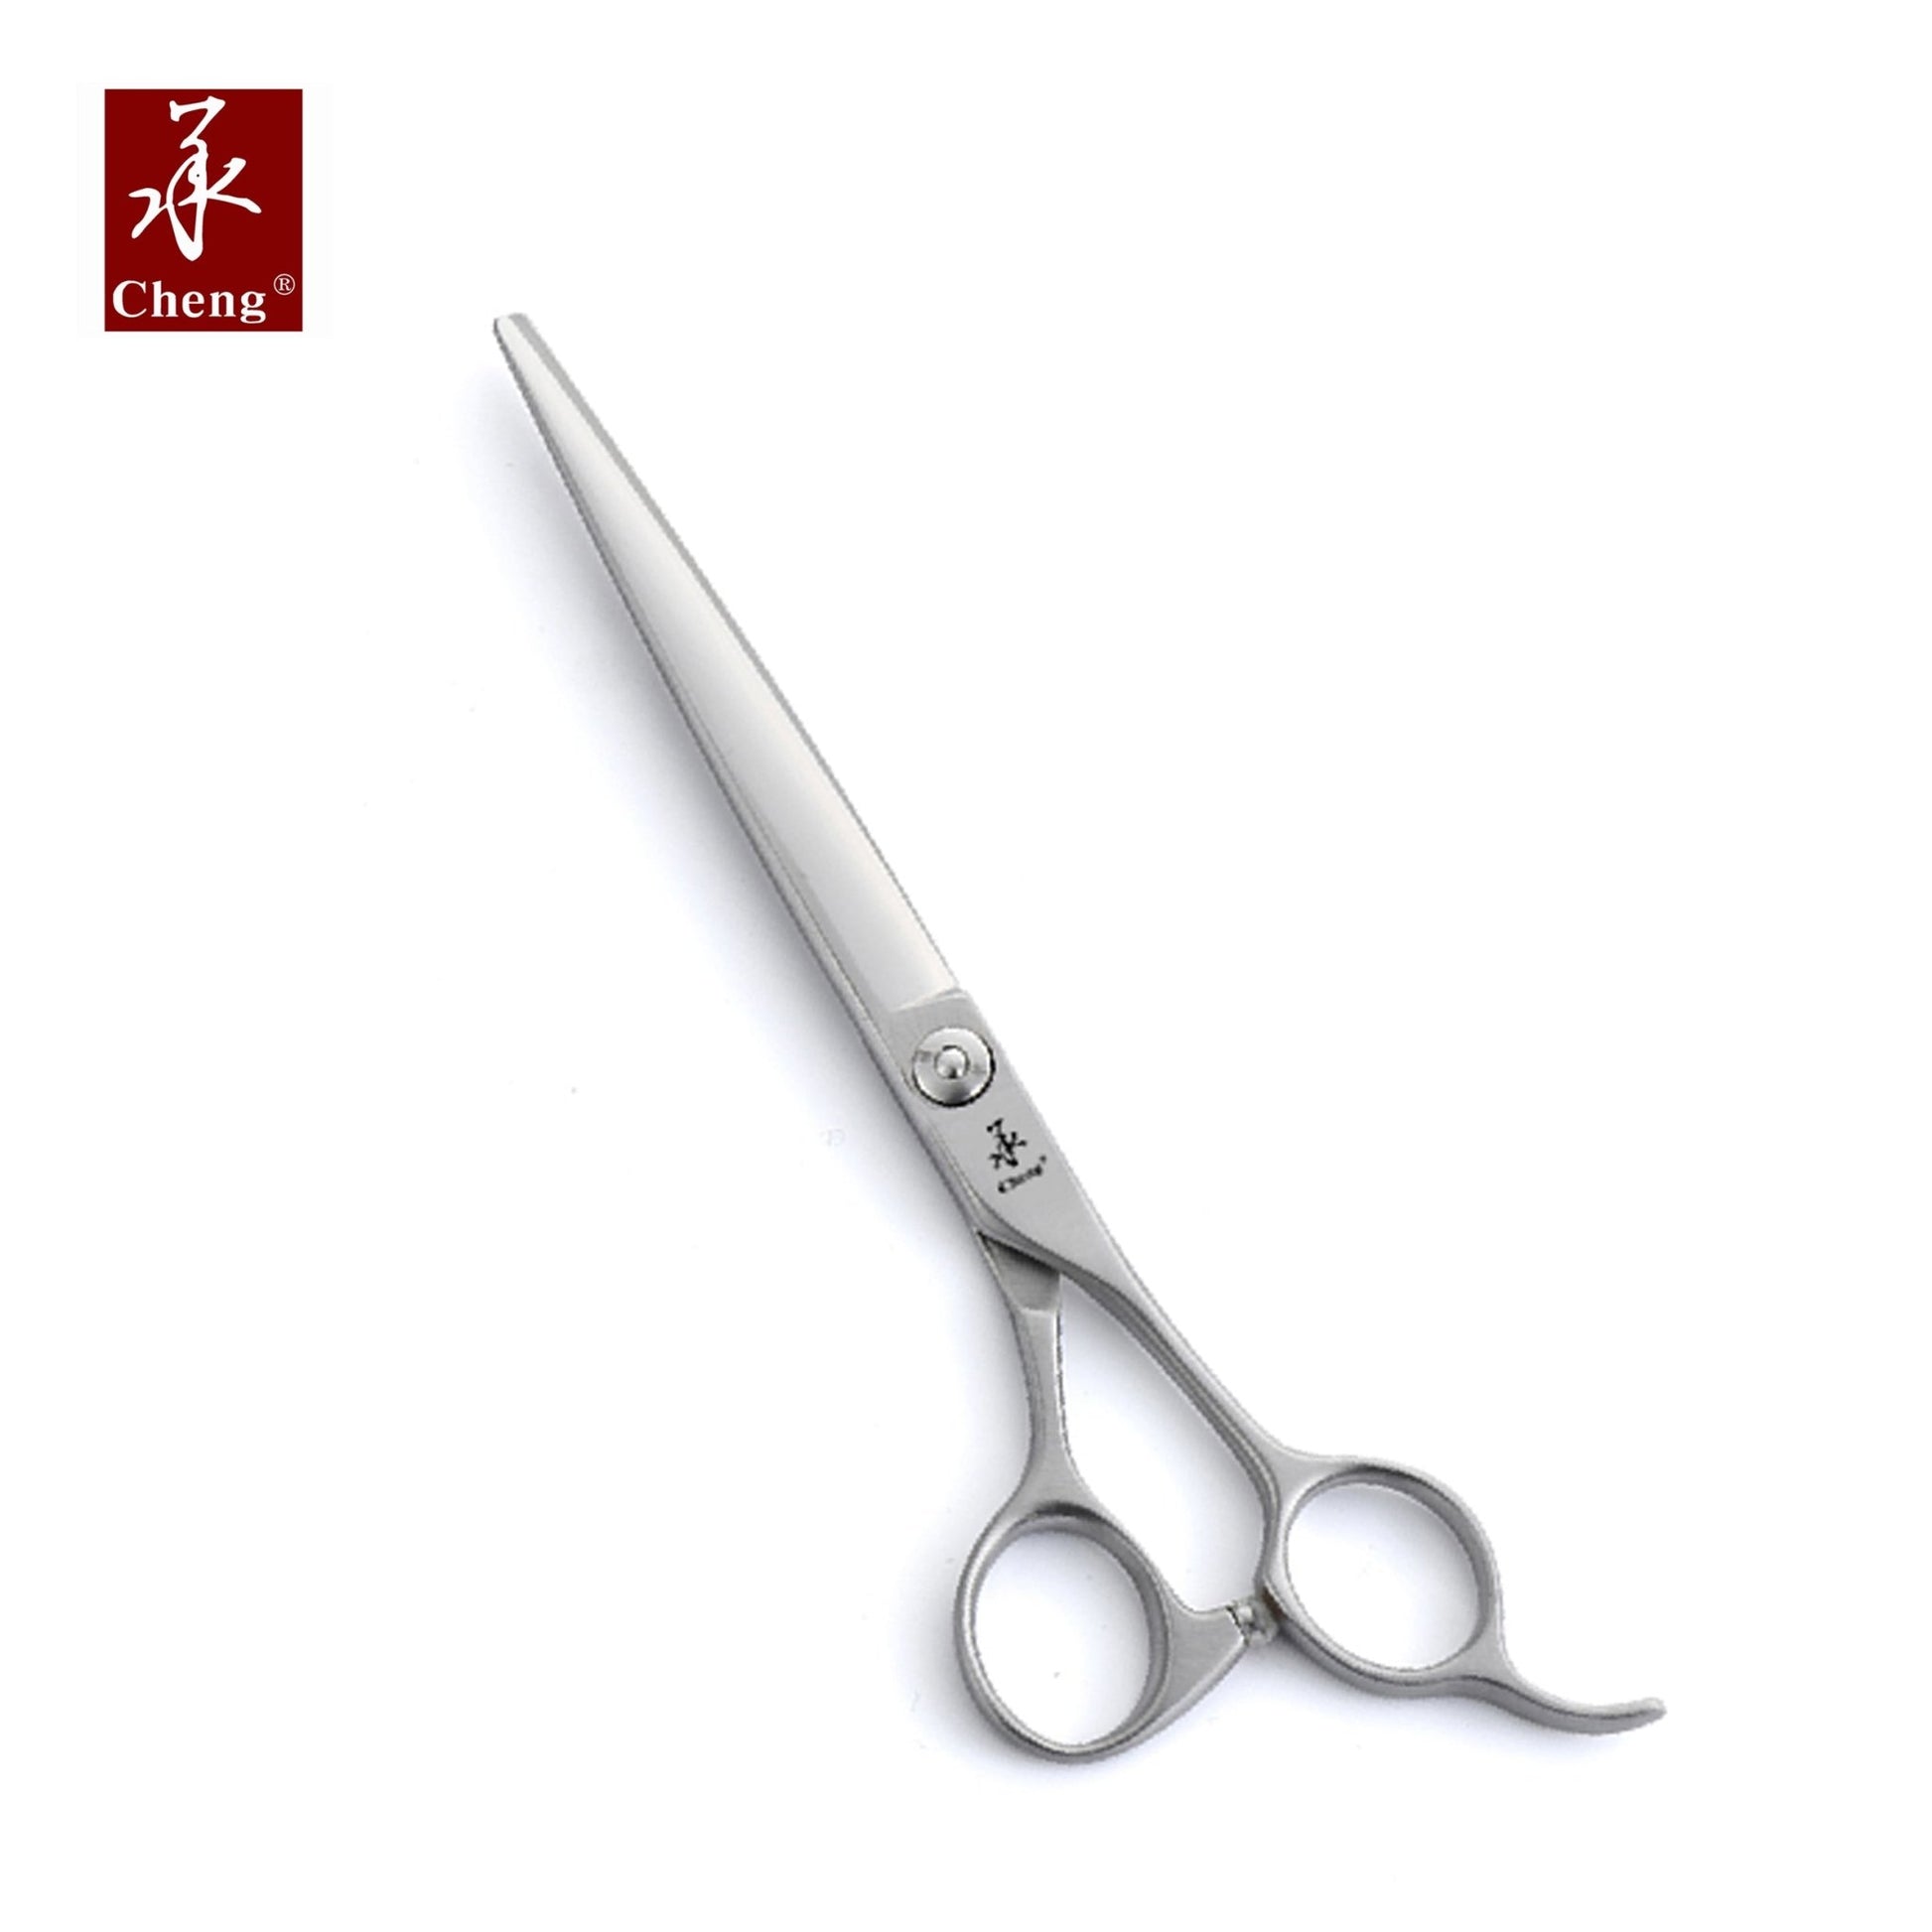 C-BF-70 Pet Grooming Scissors For Dogs Cats Hairdressing Shears 7.0Inch - Cheng Professional hair Scissors